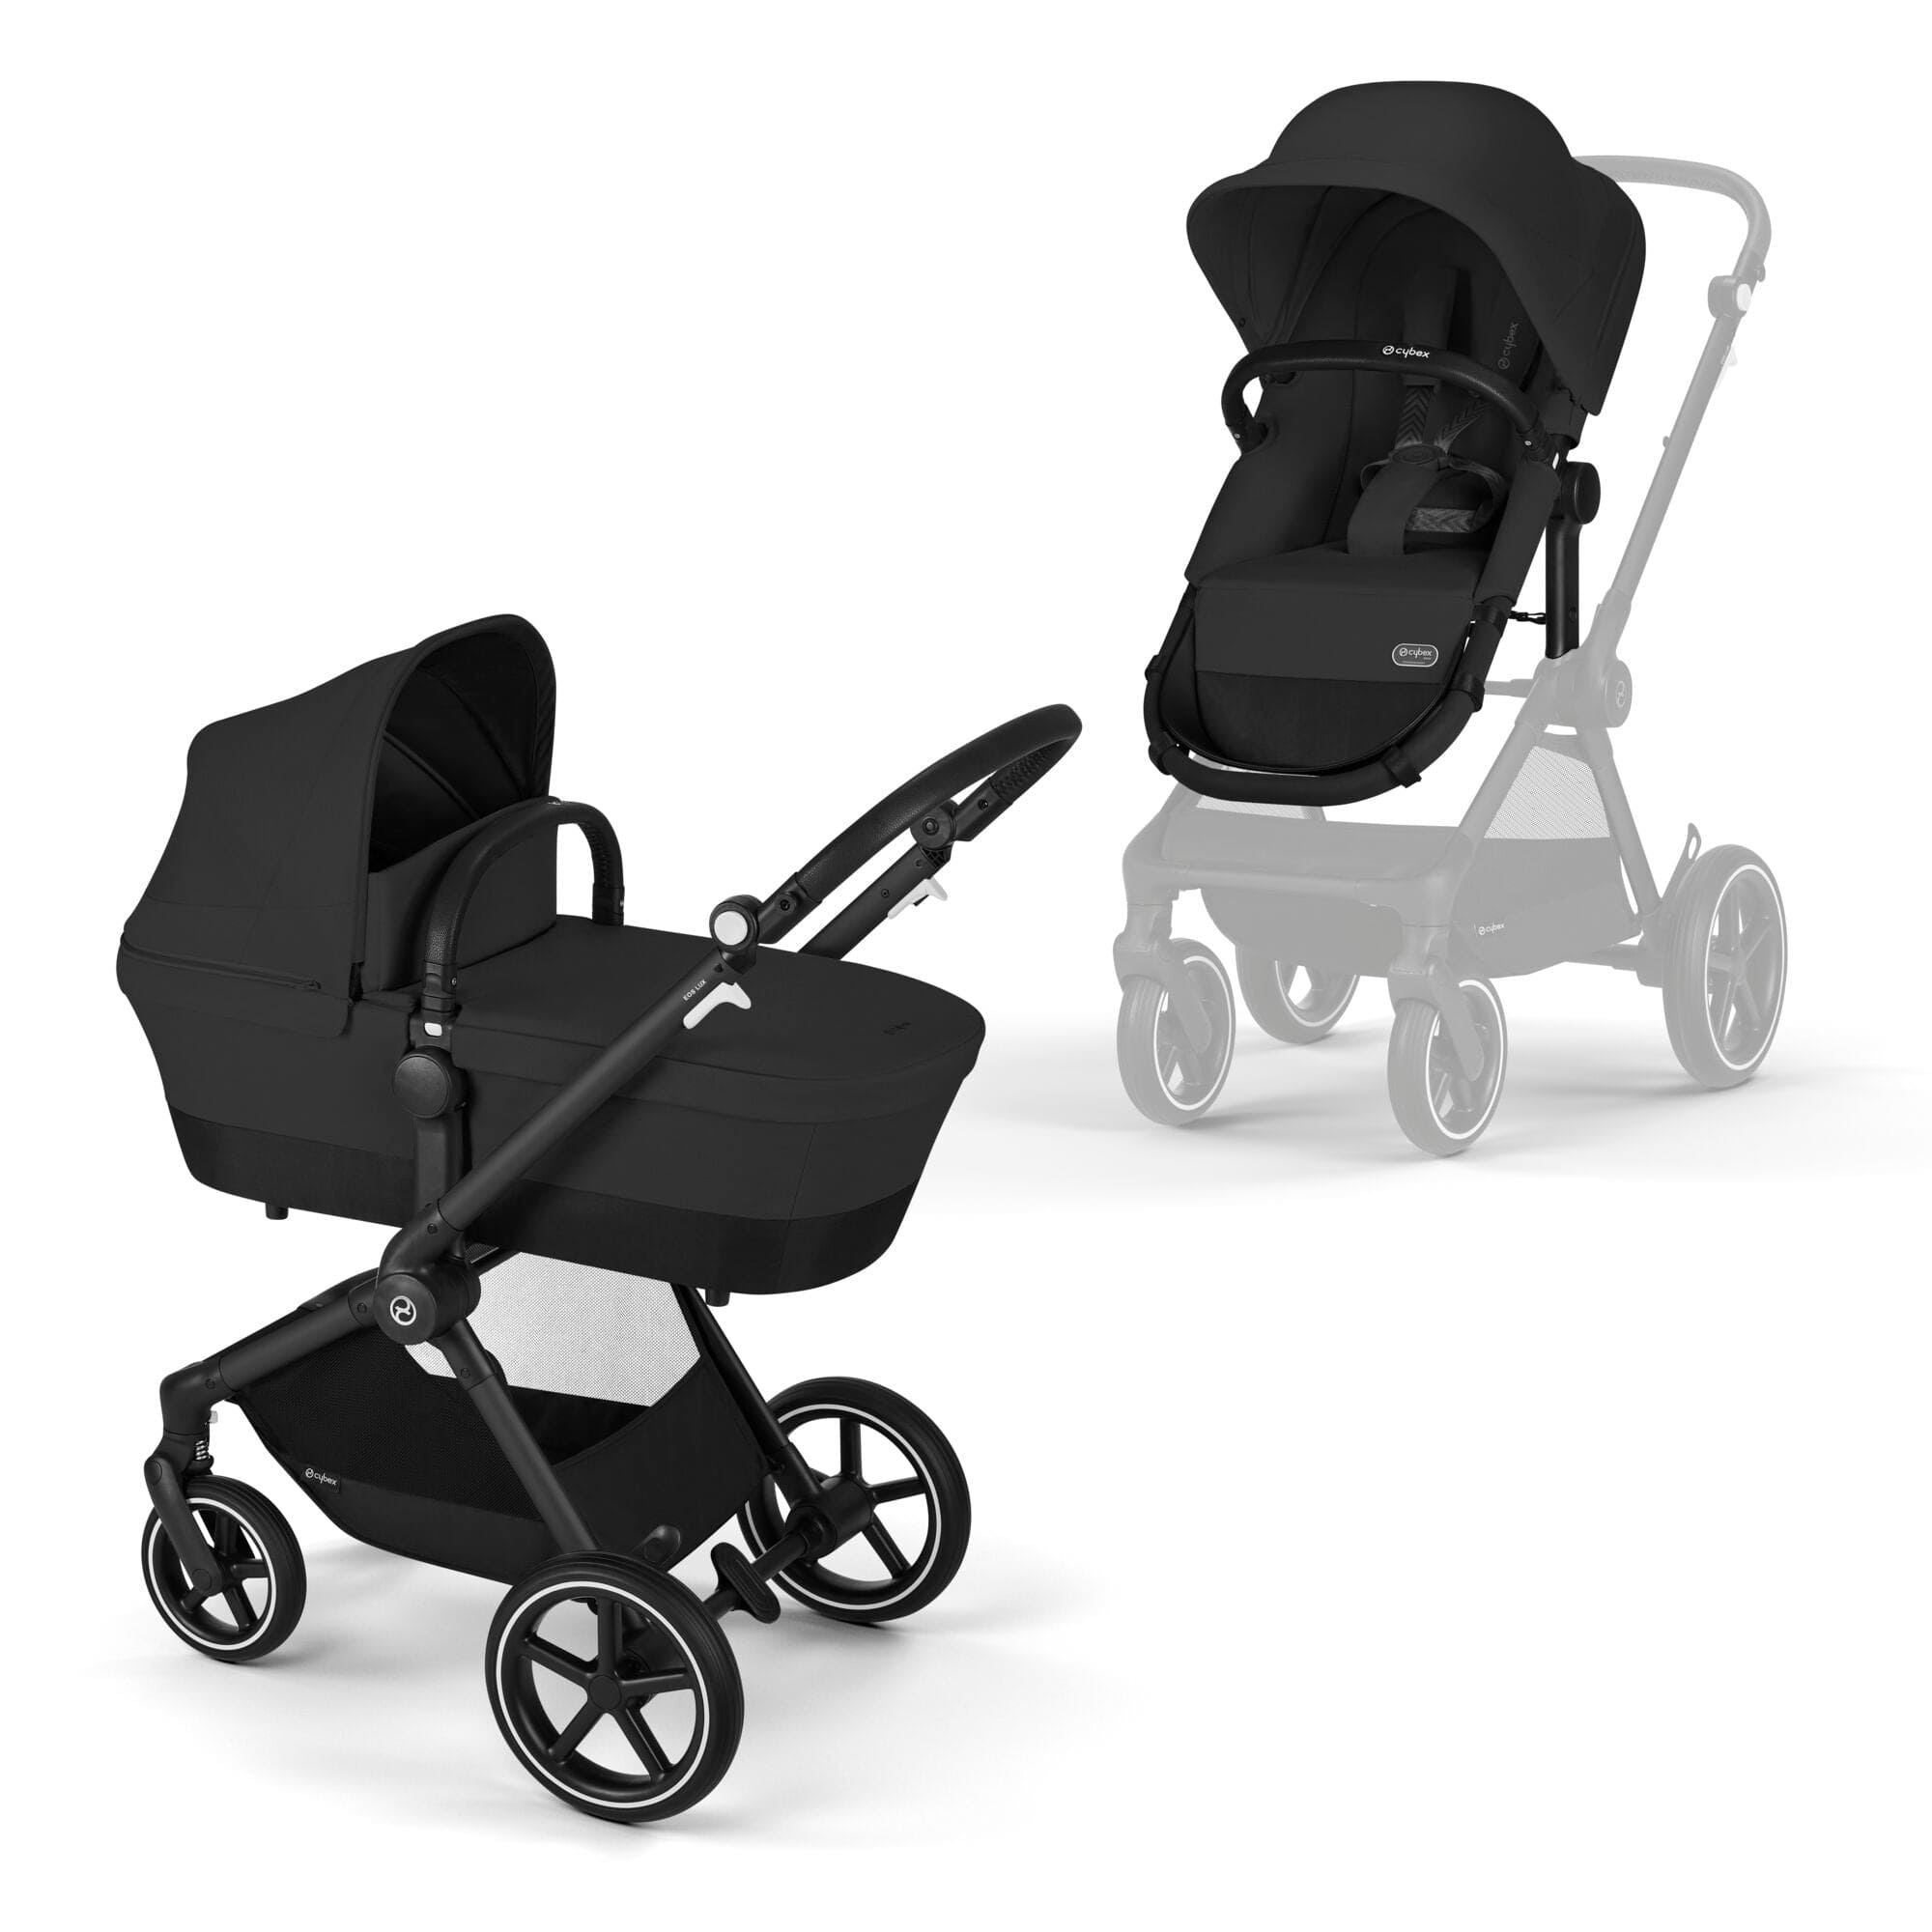 Cybex Eos Lux Stroller in Moon Black Travel Systems 522003827 4063846368112